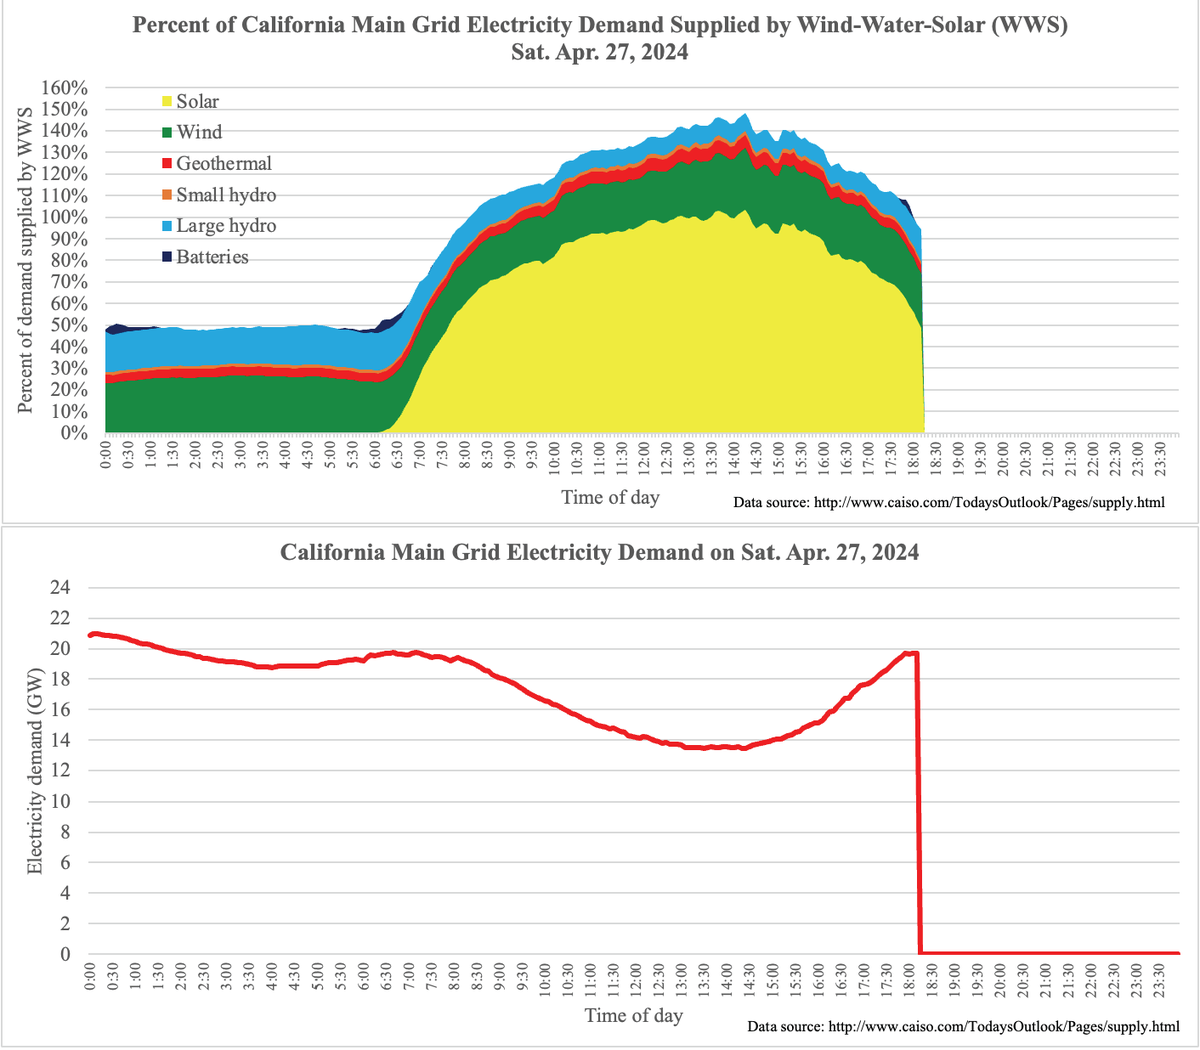 Another record falls. For 9.75 hours today (Sat Apr. 27), California #WindWaterSolar supply exceeded demand (previous record was 9.25 hours). Peak today: 148.3%. Even nighttime last night was 50% #WWS. When will naysayers stop pretending 24/7/365 is not possible?